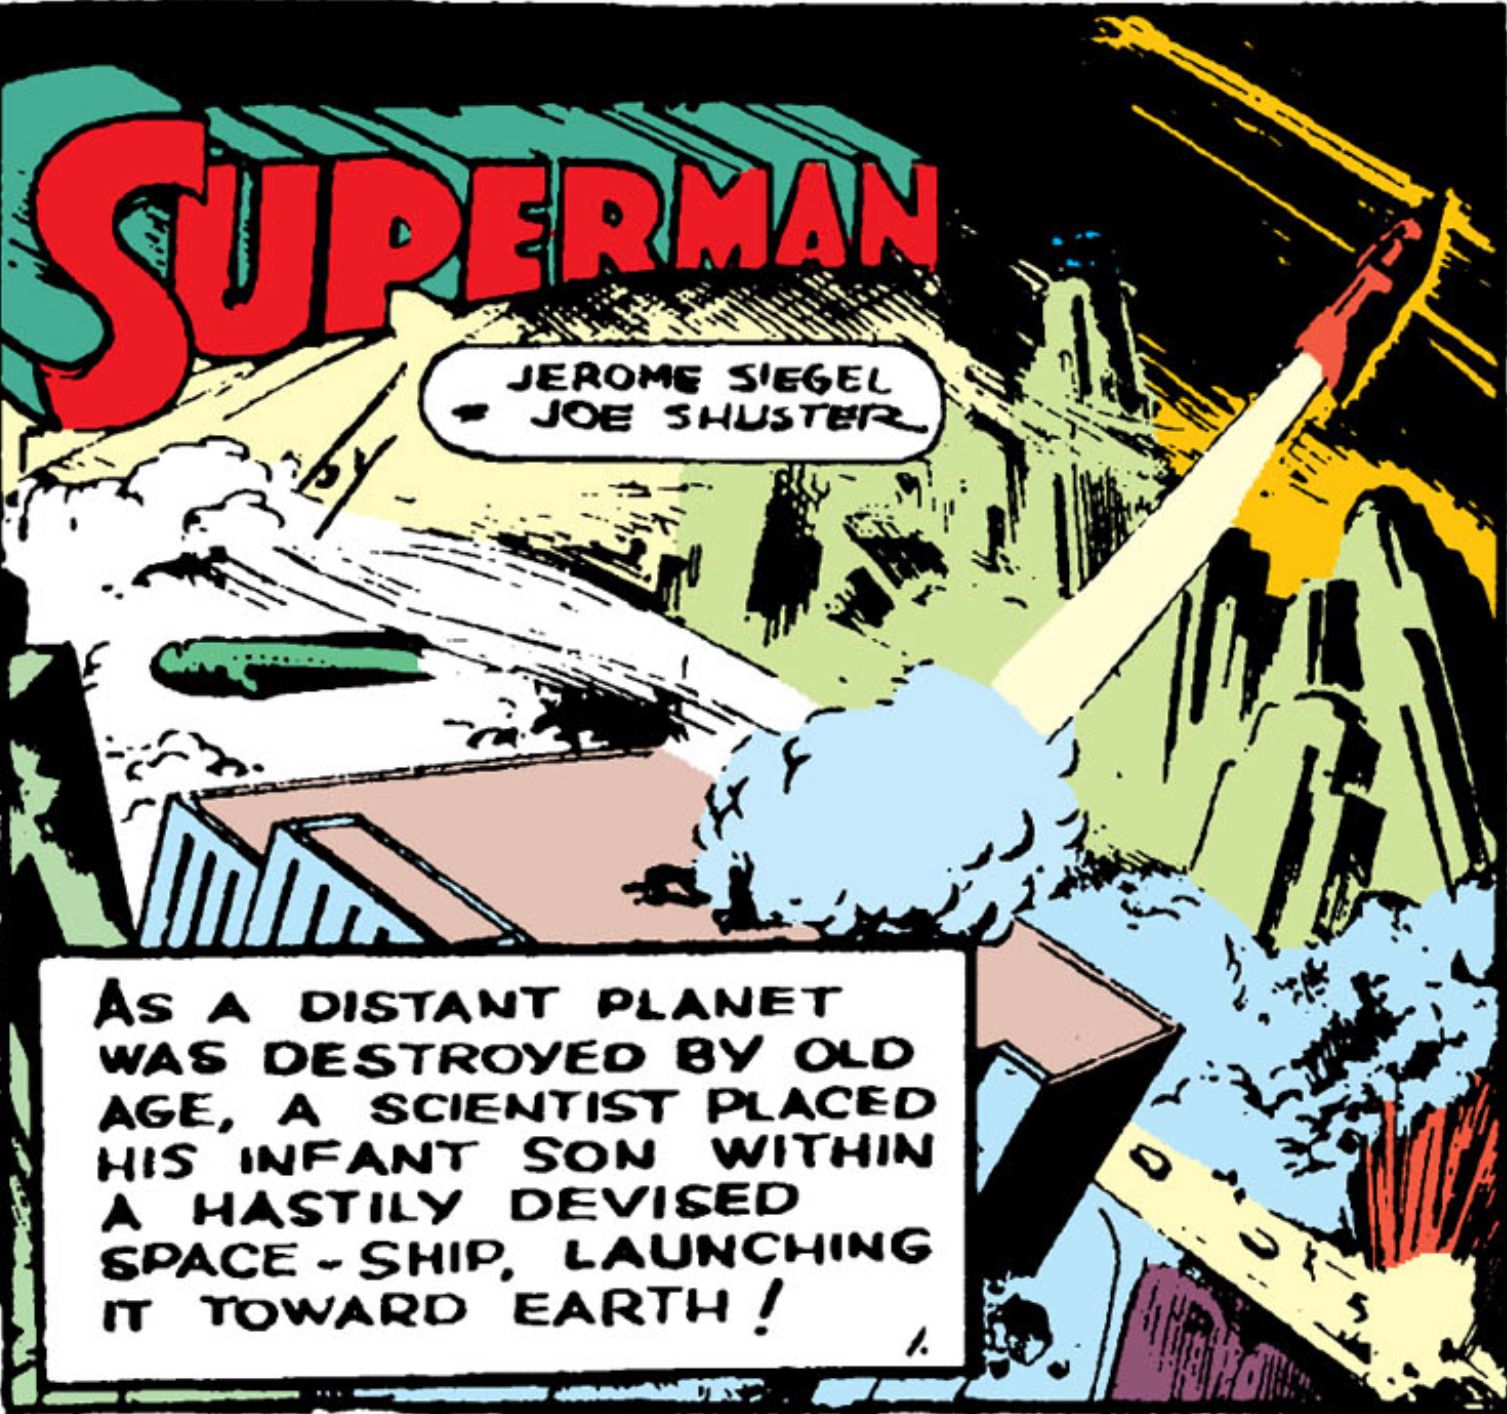 the first panel of Action Comics 1. Text reads Superman by Jerome Siegel and Joe Shuster. As A DISTANT PLANET WAS Destroyed BY OLD AGE, A SCIENTIST PLACED HIS INFANT SON WITHIN A HASTILY DEVISED SPACE-SHIP, LAUNCHING IT TOWARD EARTH!